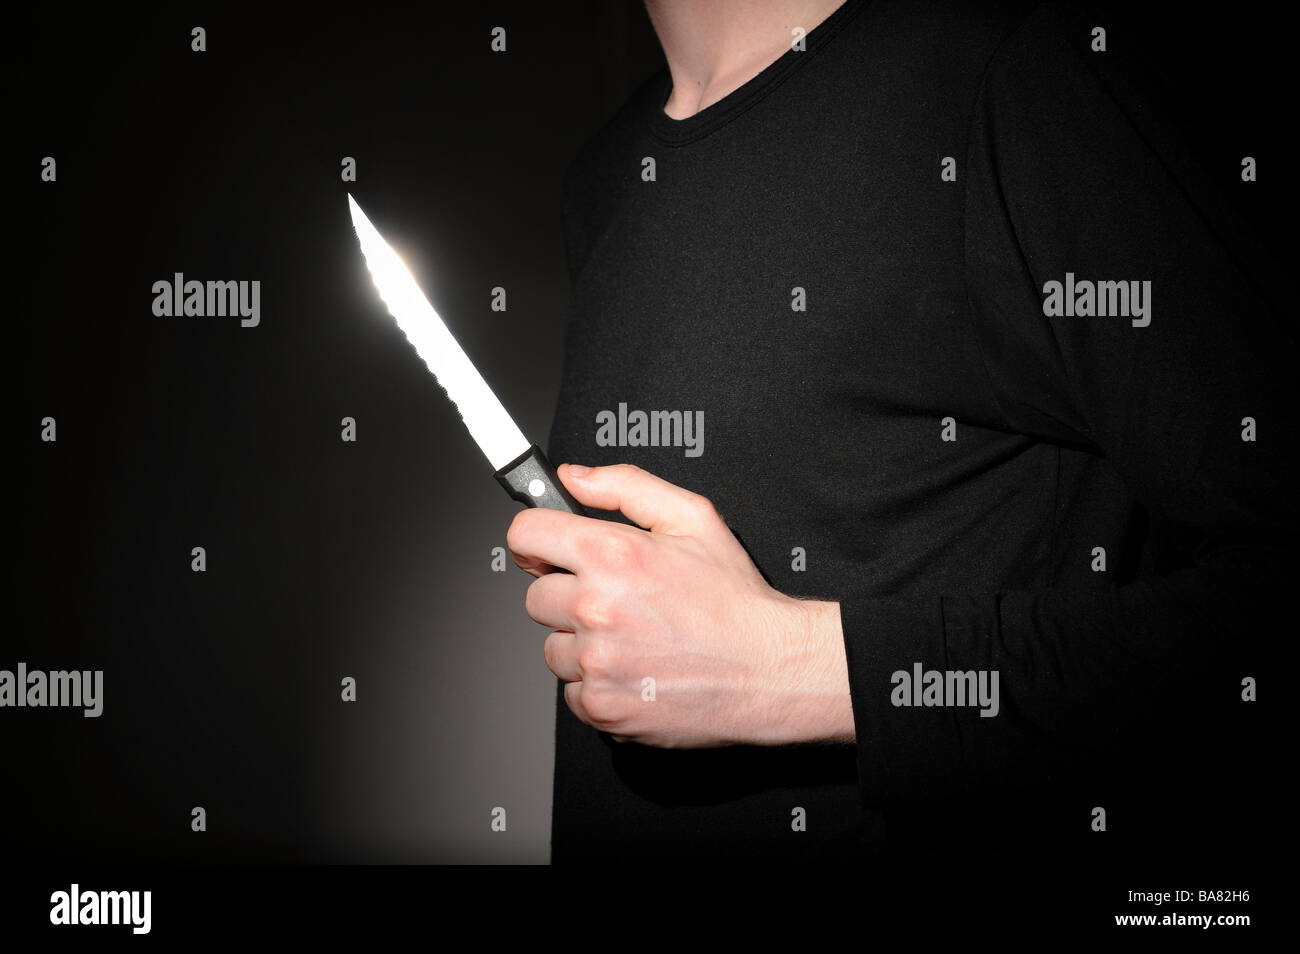 Man holding an offensive weapon Stock Photo